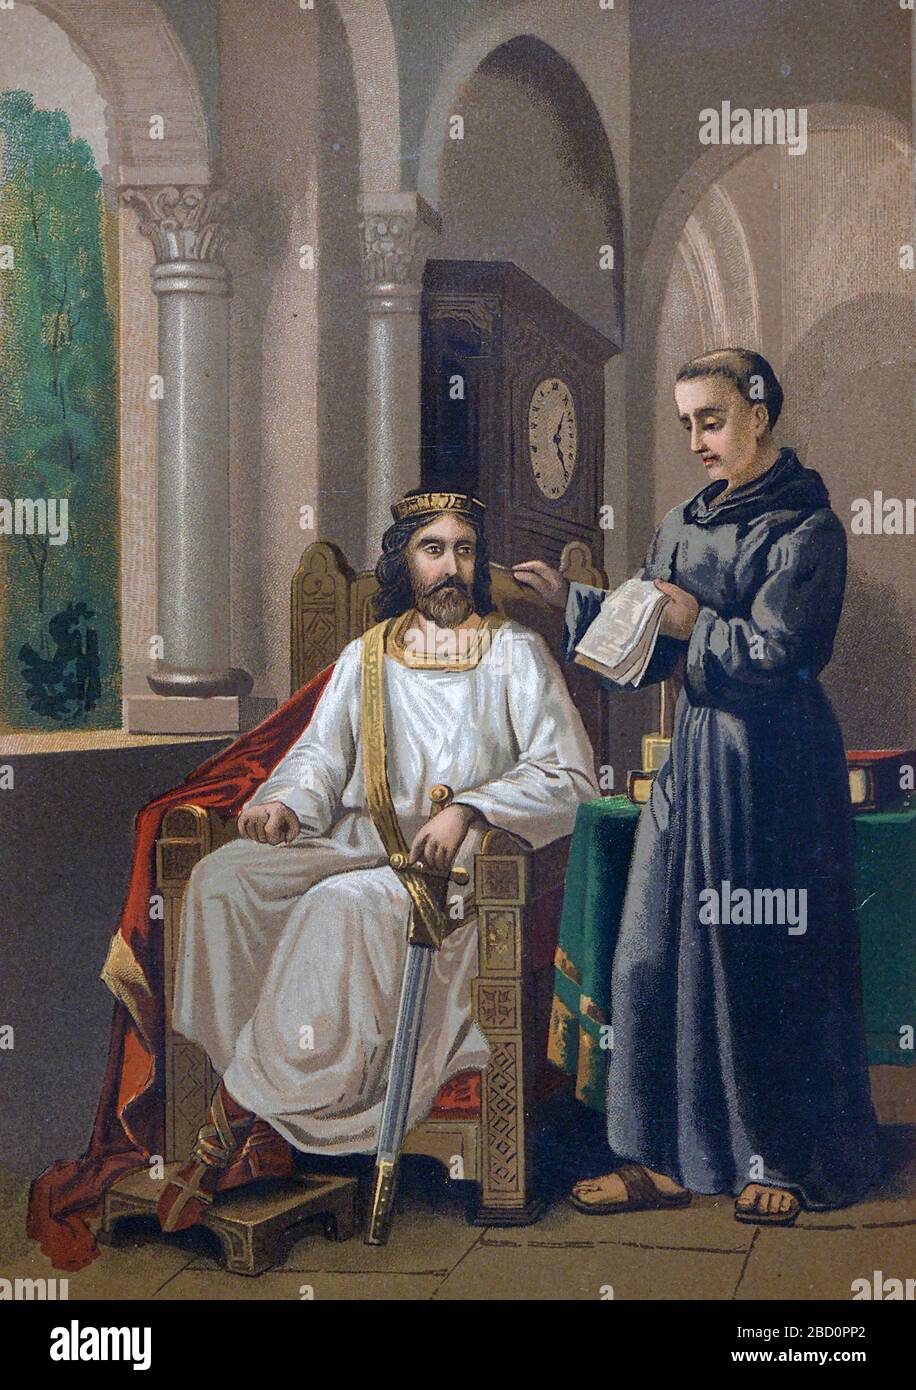 Charlemagne and Alcuin (Alcuin of York) [here as Carlomagno and Alcuino]. Illustration for La Ciencia Y Sus Hombres by Luis Figuier (D Jaime Seix, 1876). Large chromolithograph. Stock Photo